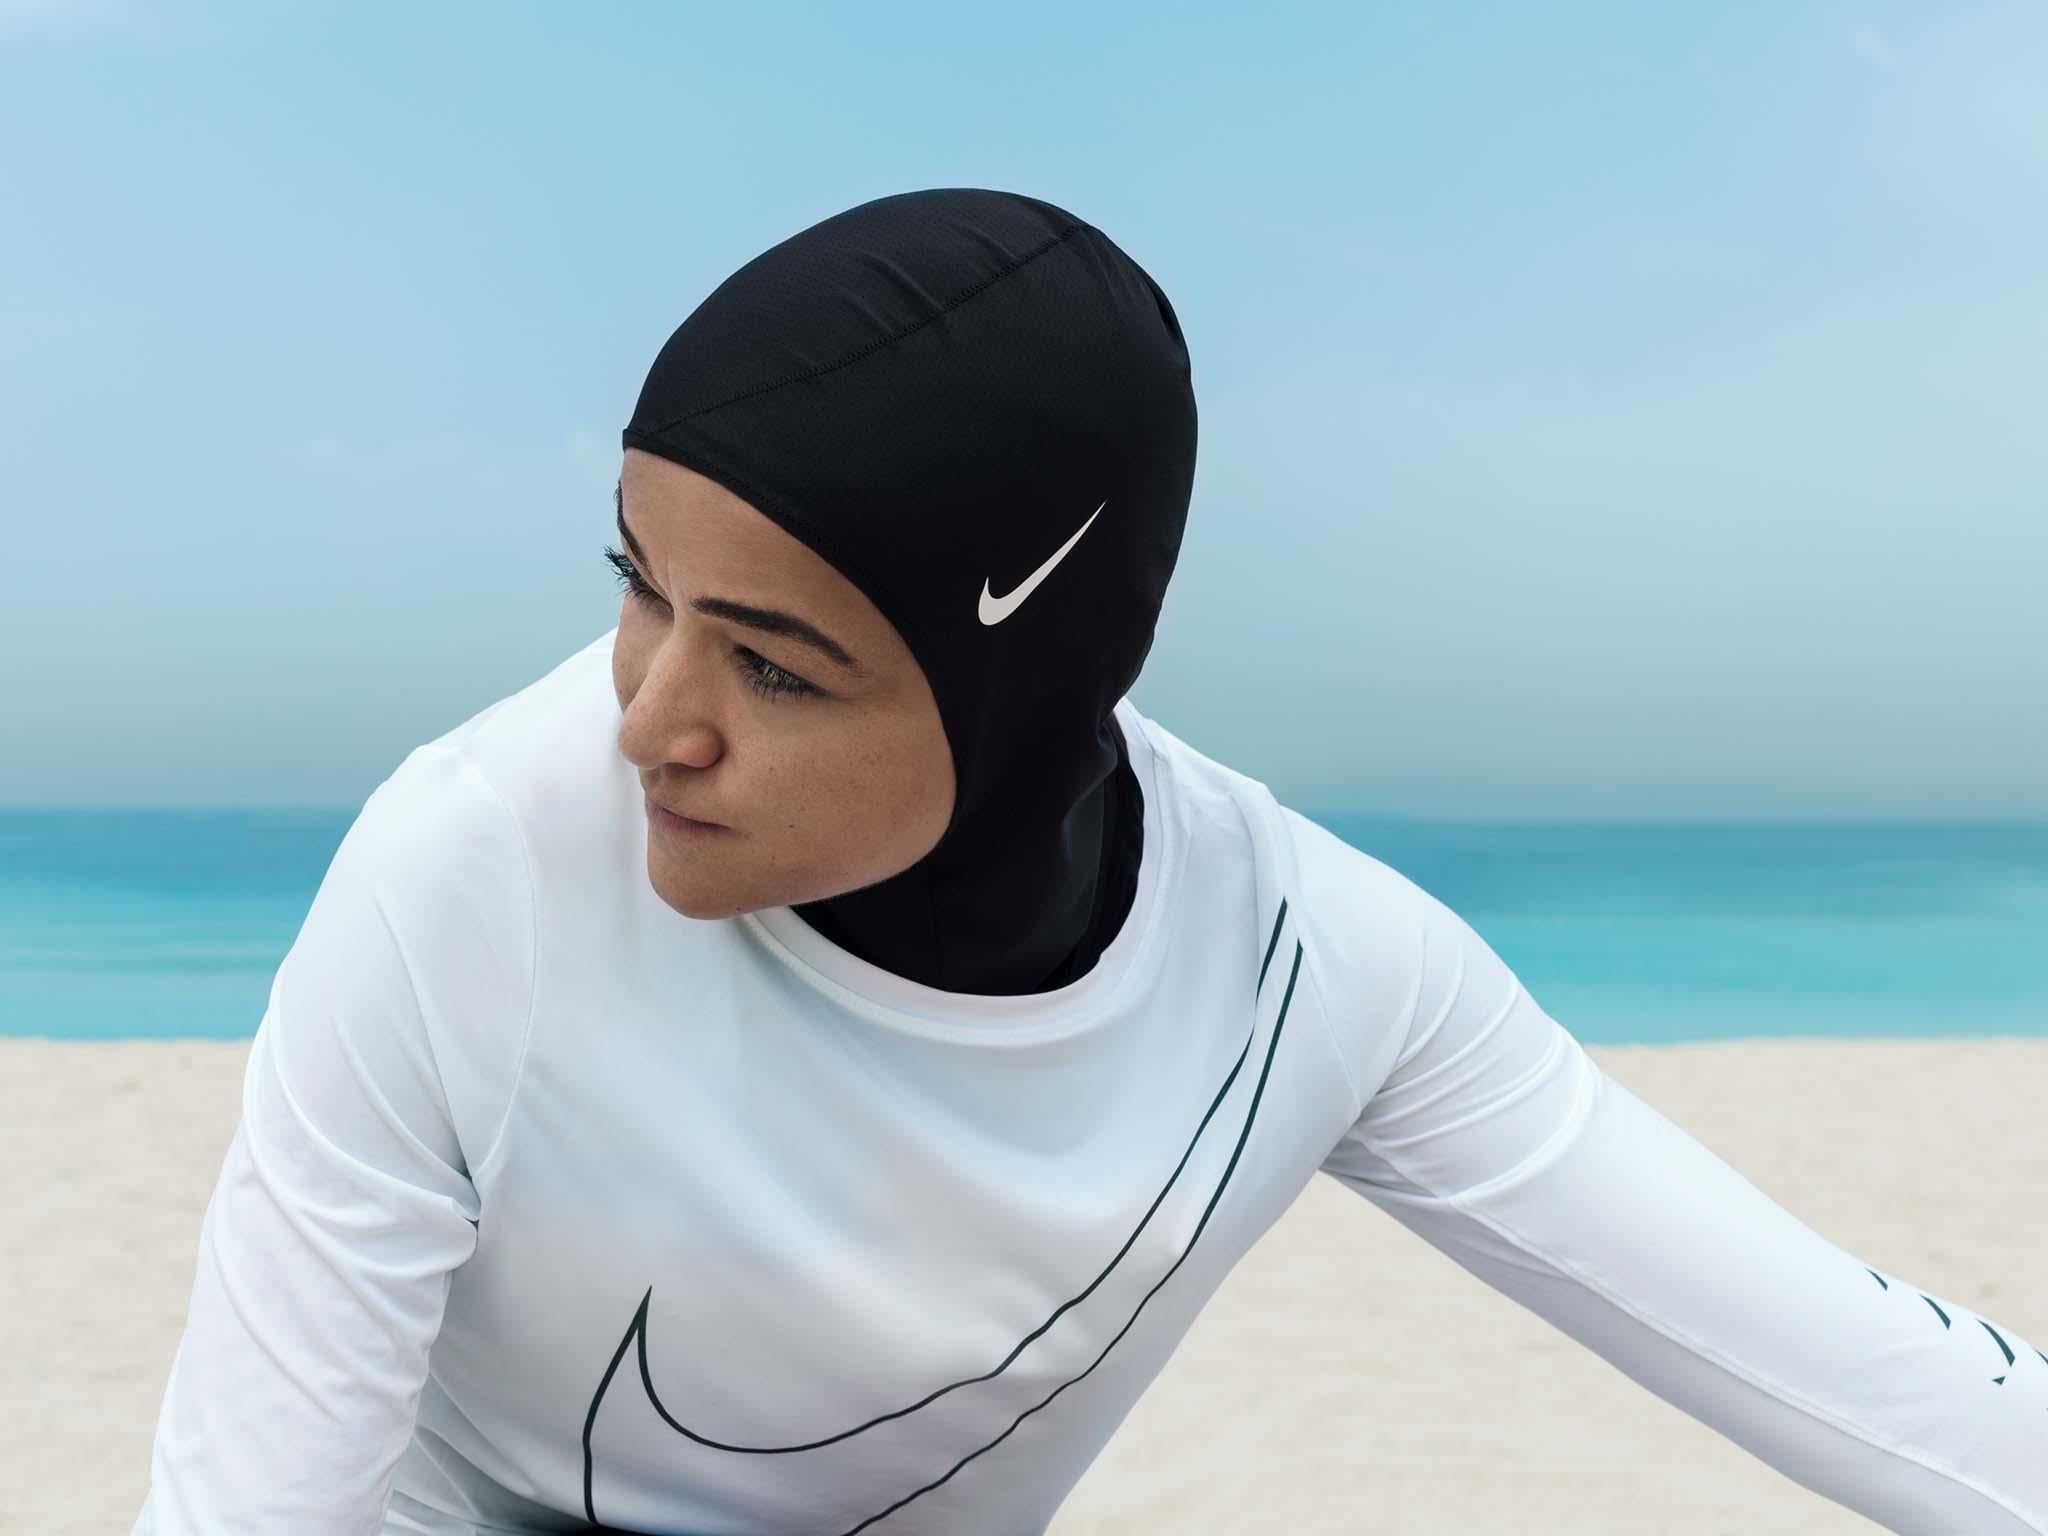 Nike Is Launching A High Performance Hijab For Muslim Athletes The Independent The Independent